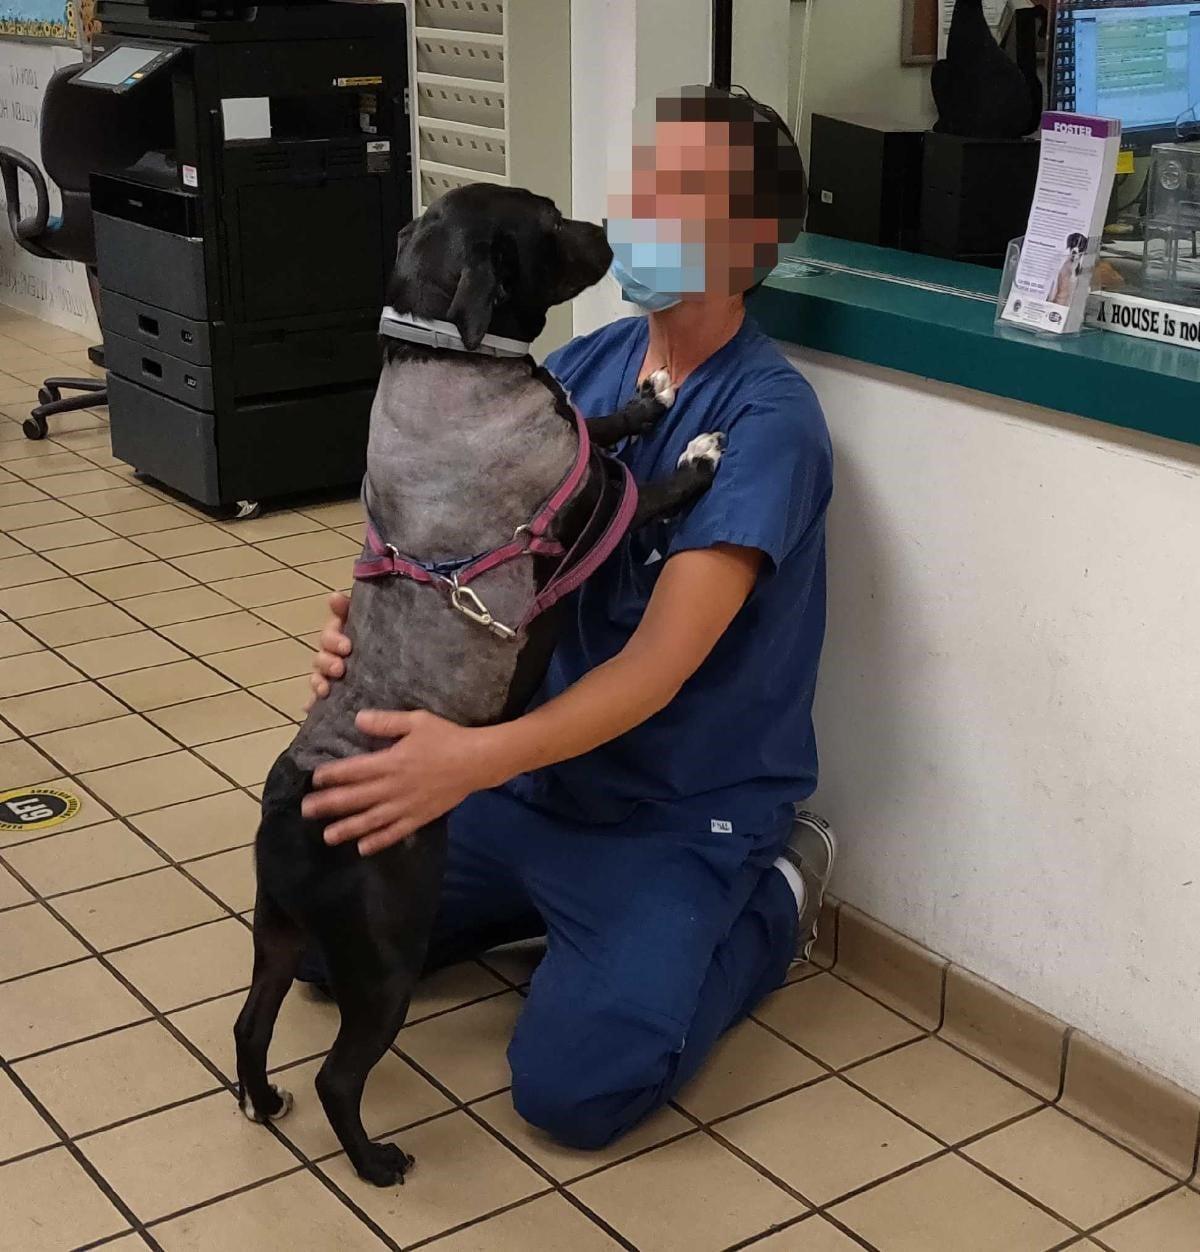 (Courtesy of <a href="http://www.pbcgov.com/publicsafety/animalcare/">Palm Beach County Animal Care and Control</a>)